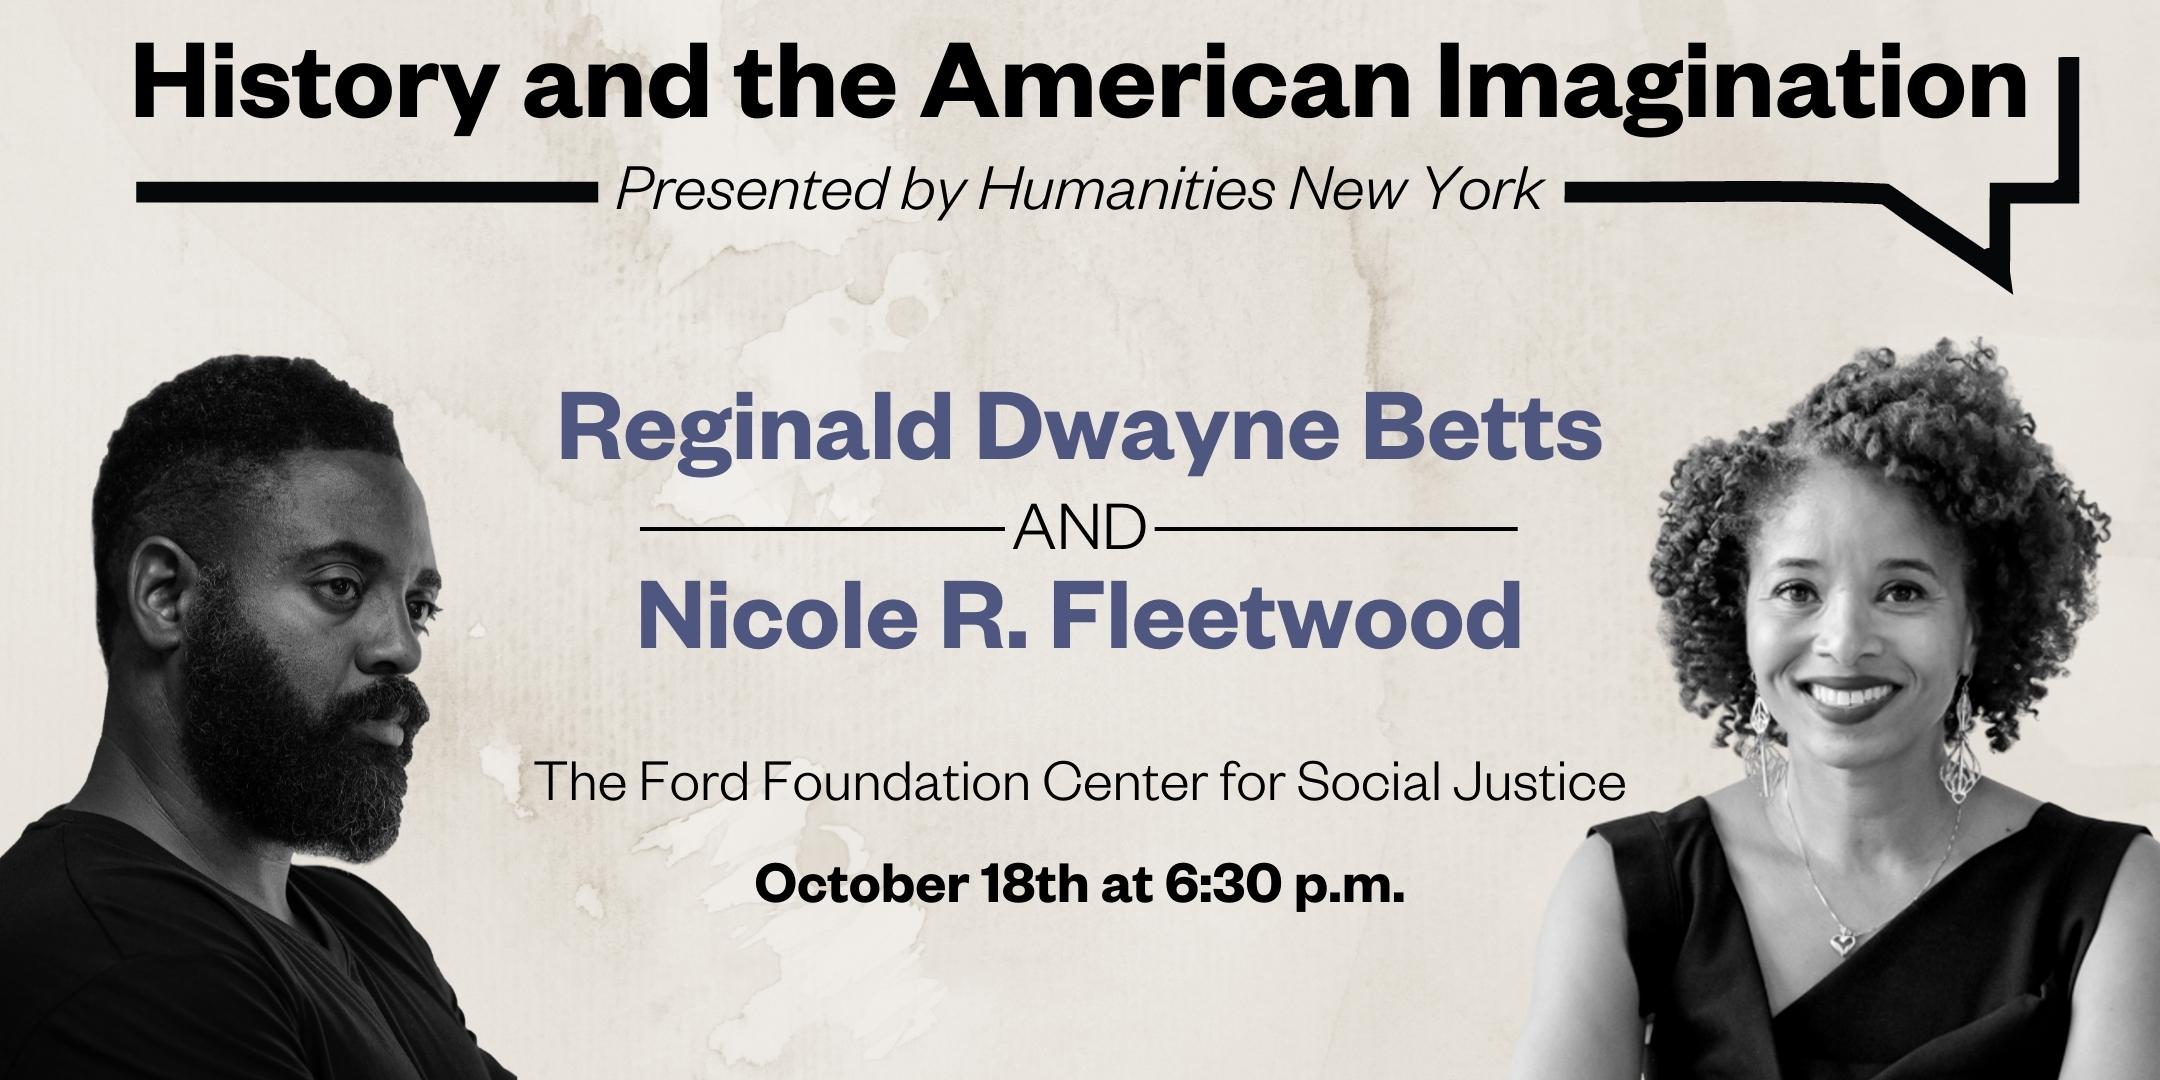 An announcement for History and the American Imagination, taking place at the Ford Foundation Center for Social Justice on October 18 at 6:30 p.m.. Depicts featured speakers Reginald Dwayne Betts and Nicole R. Fleetwood.